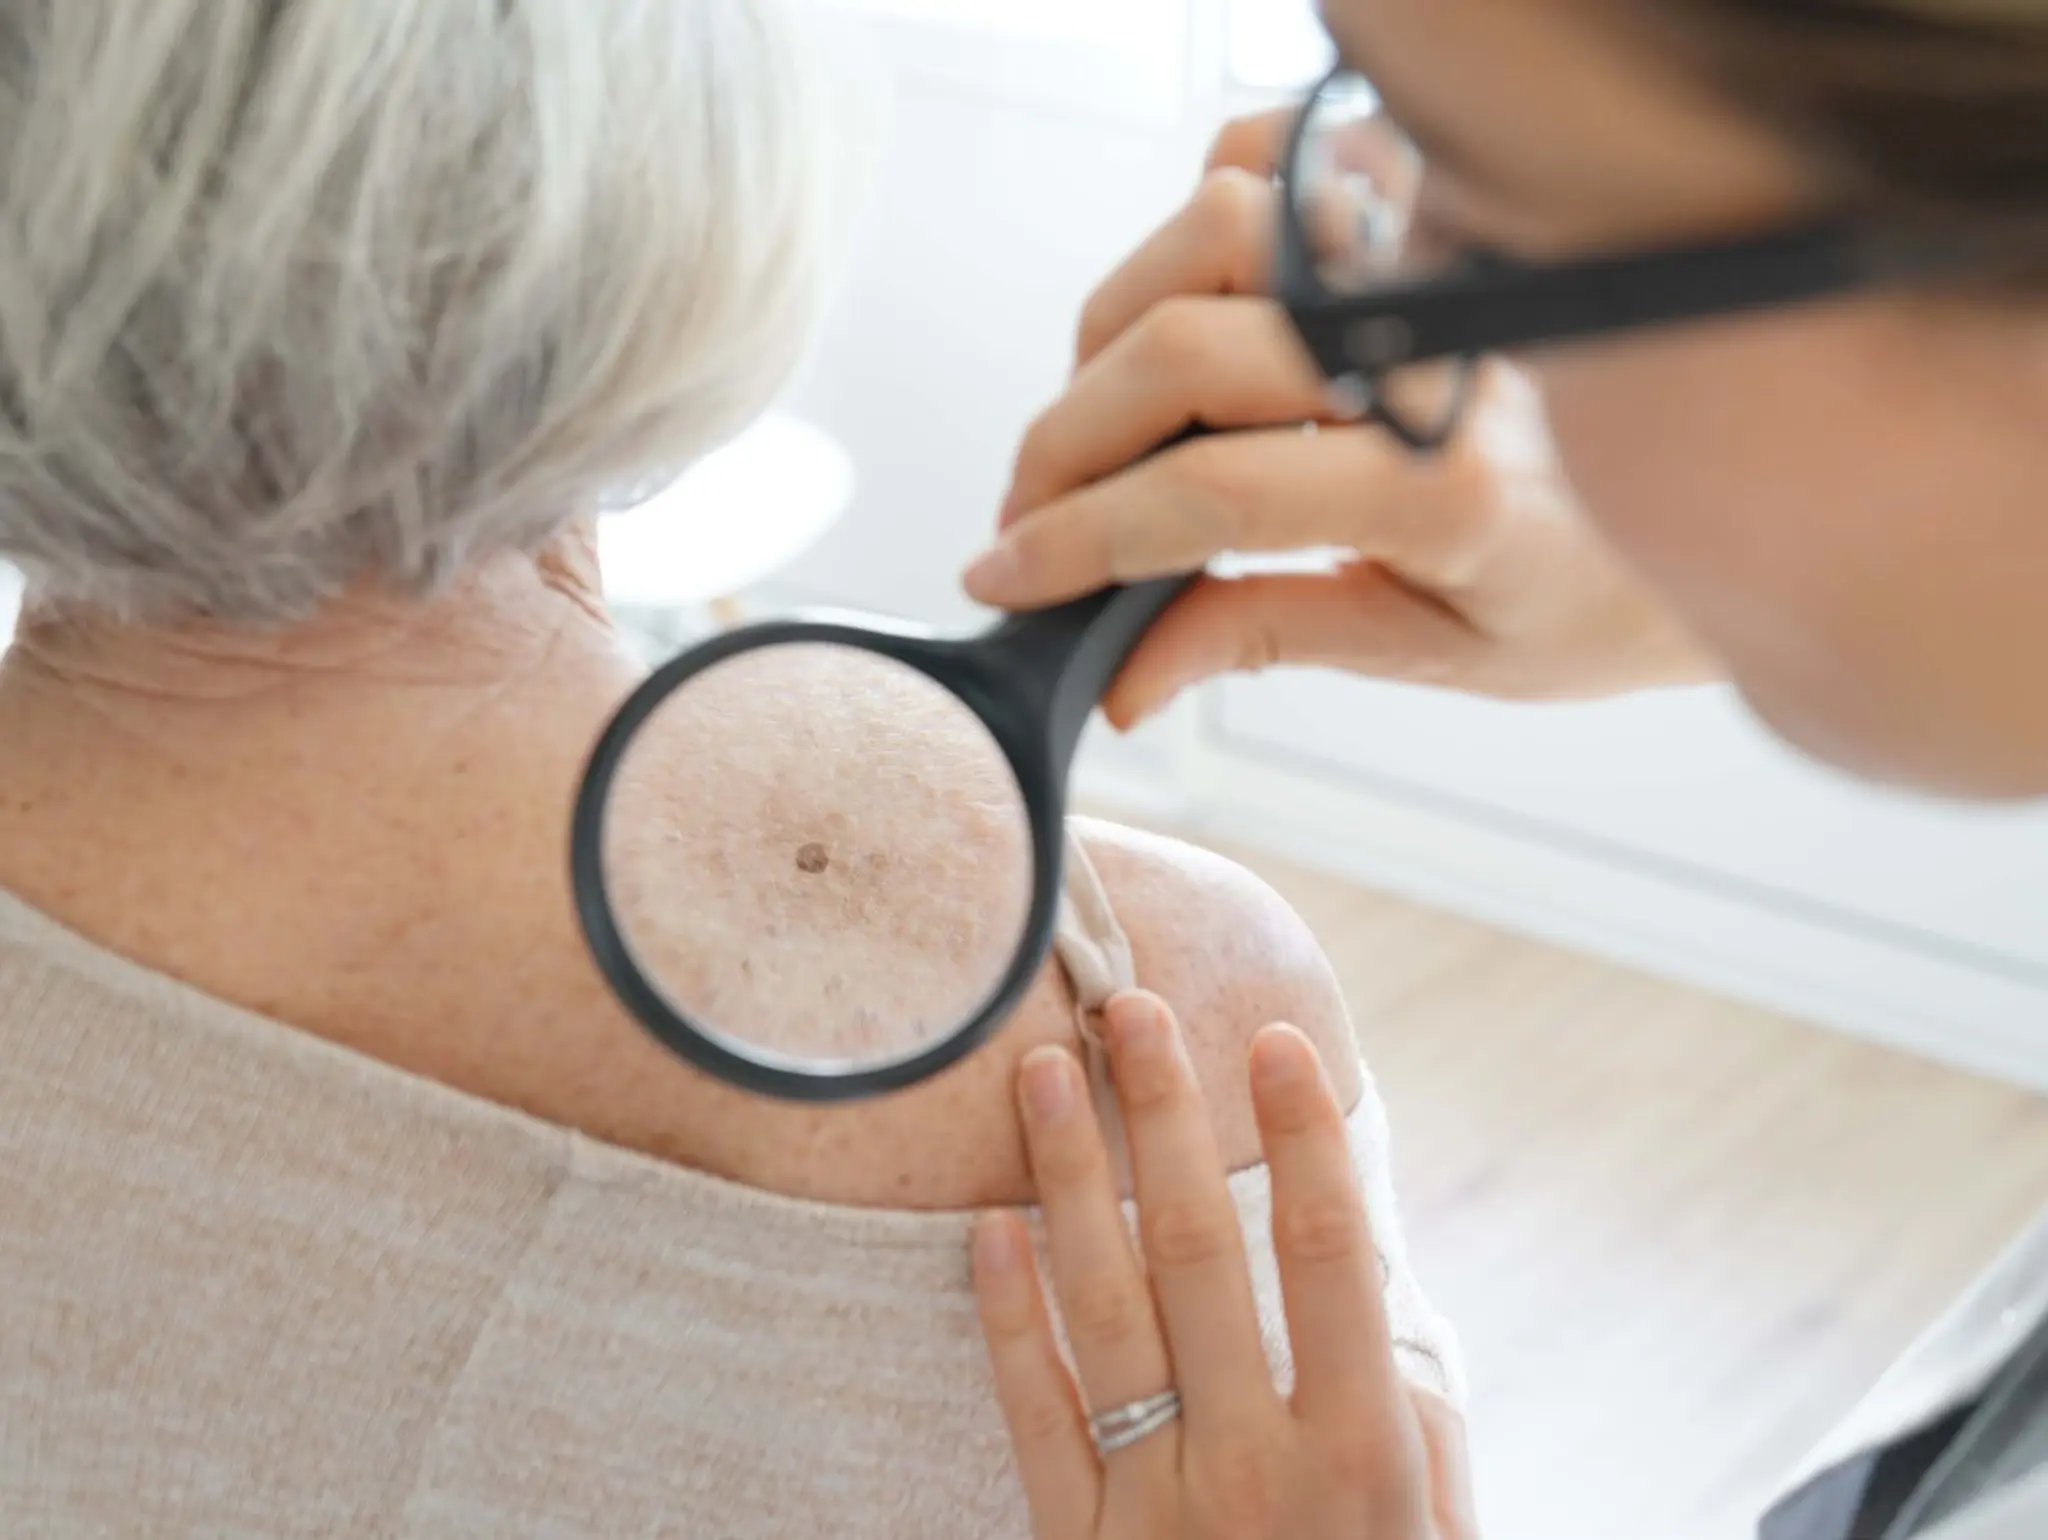 FDA approves skin cancer AI detection device